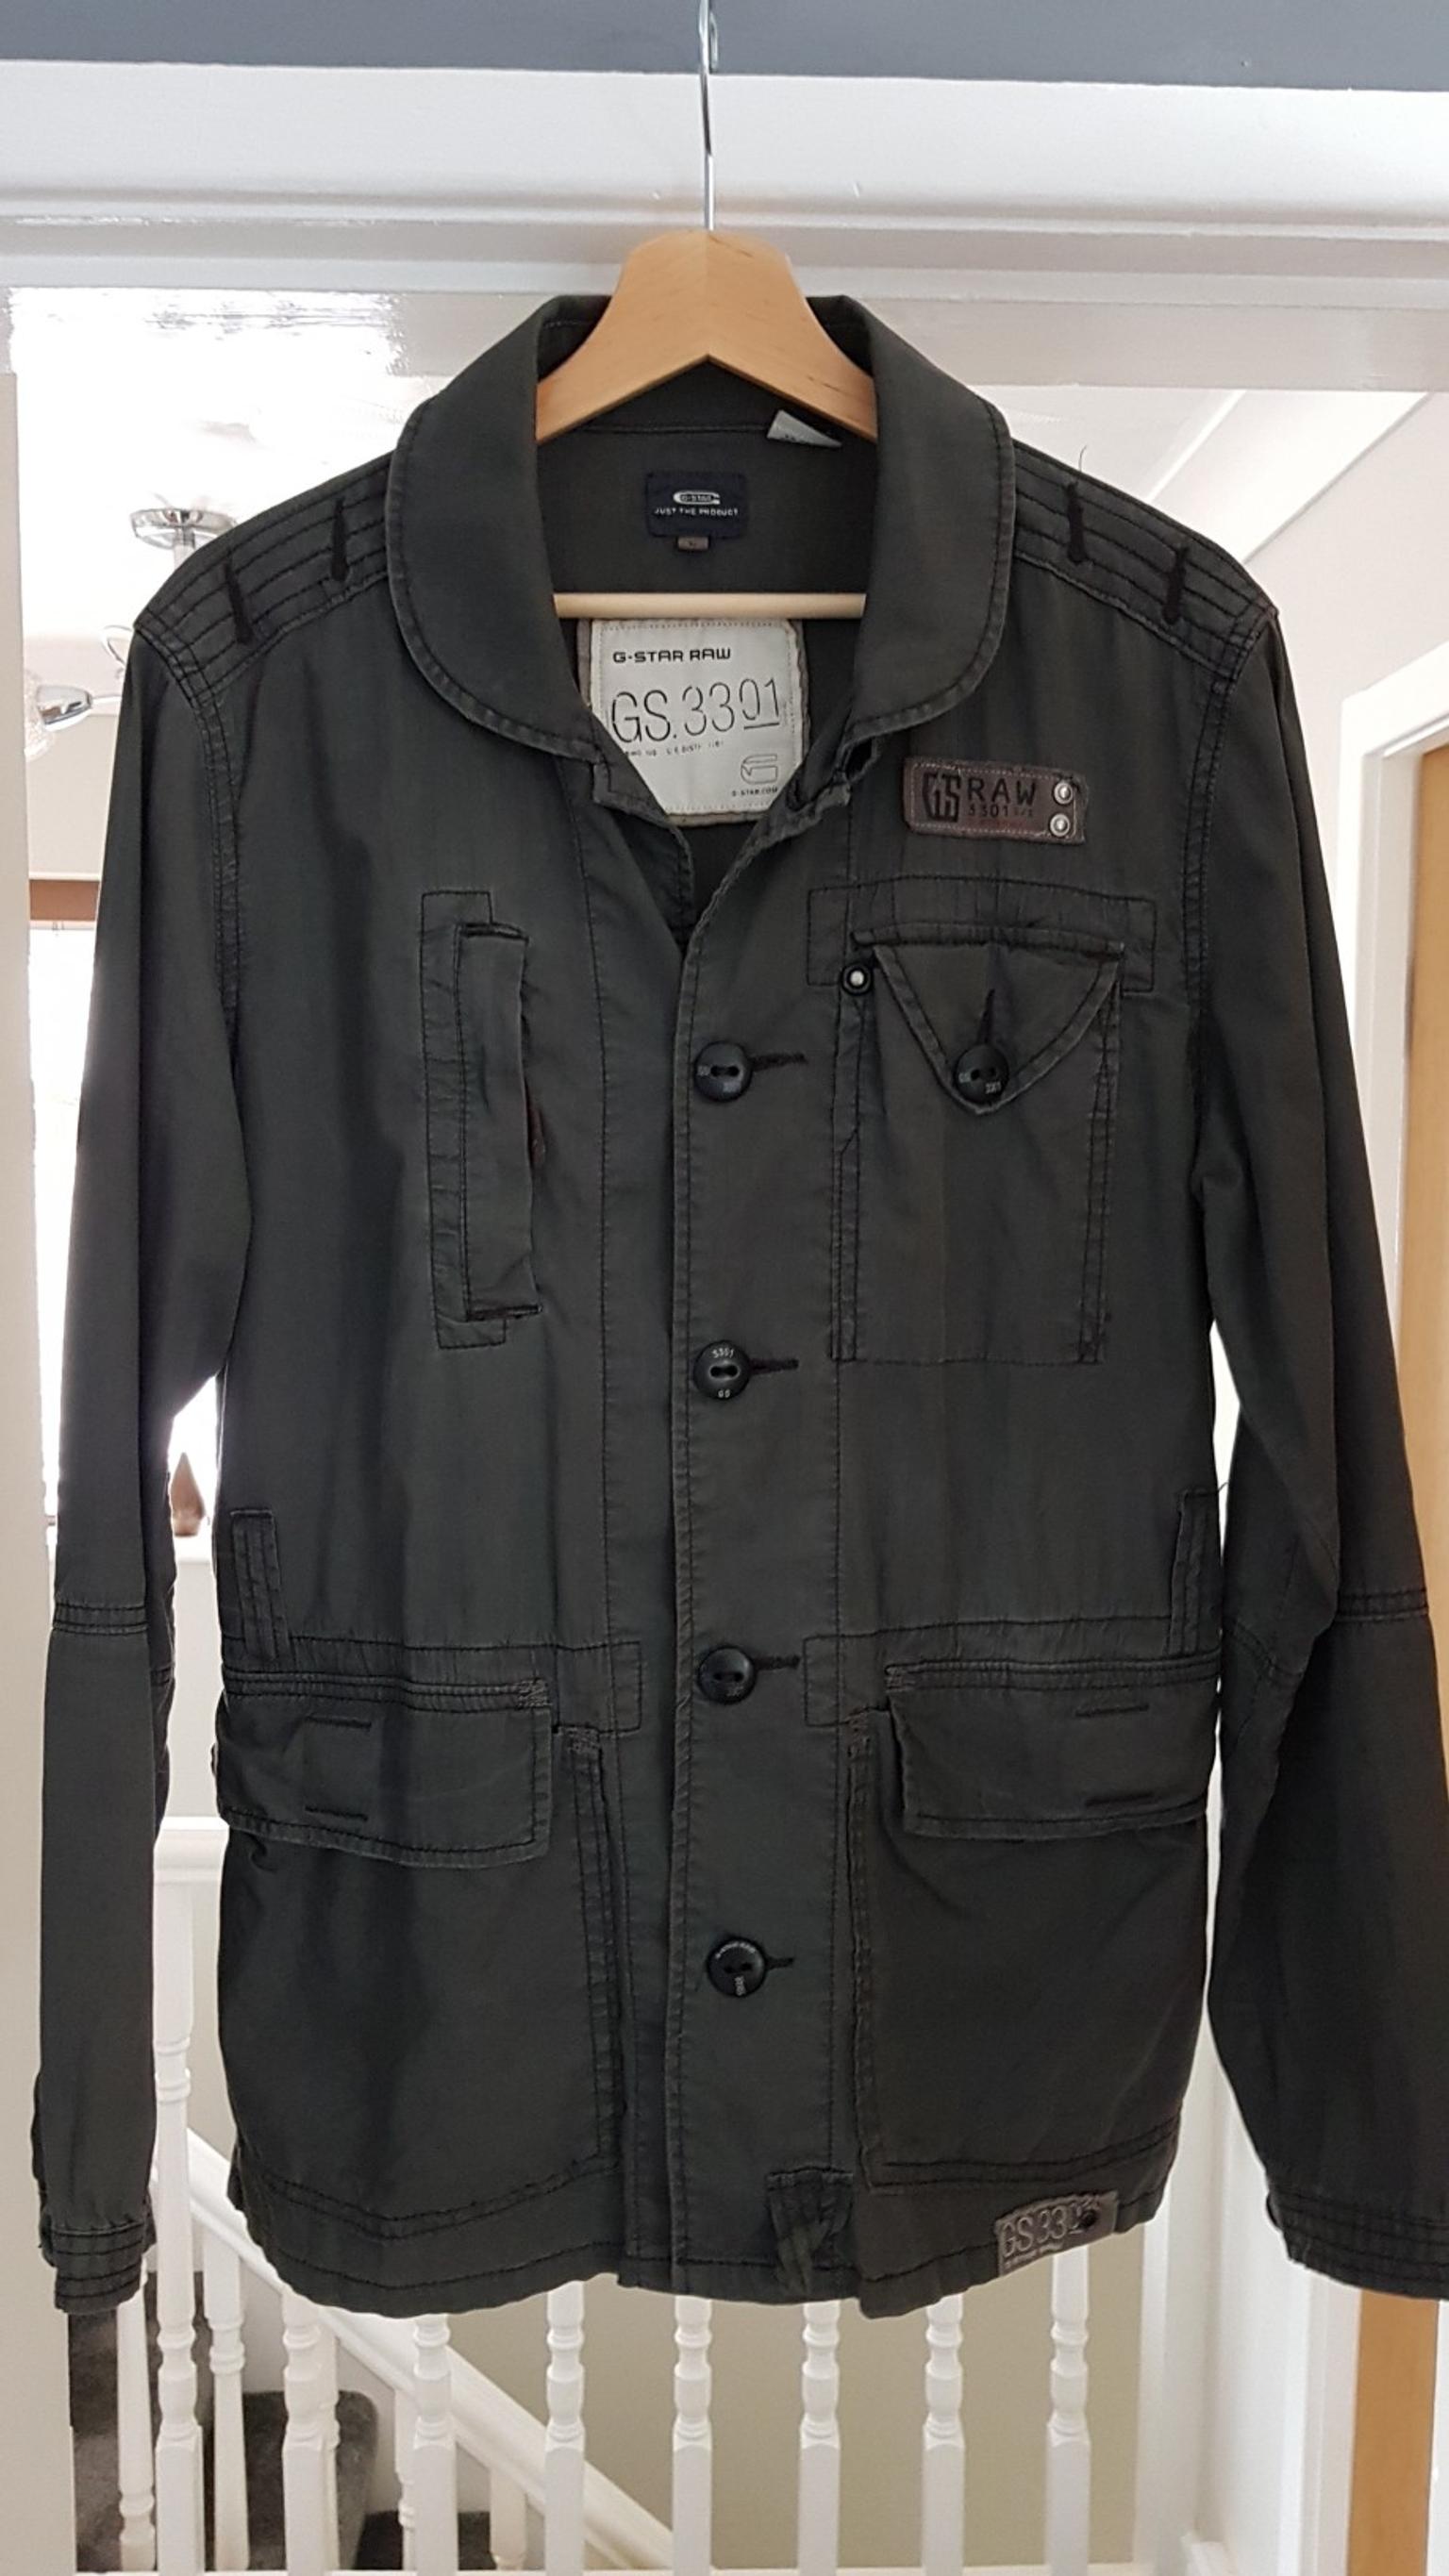 G STAR RAW COAT in BL2 Bolton for £9.99 